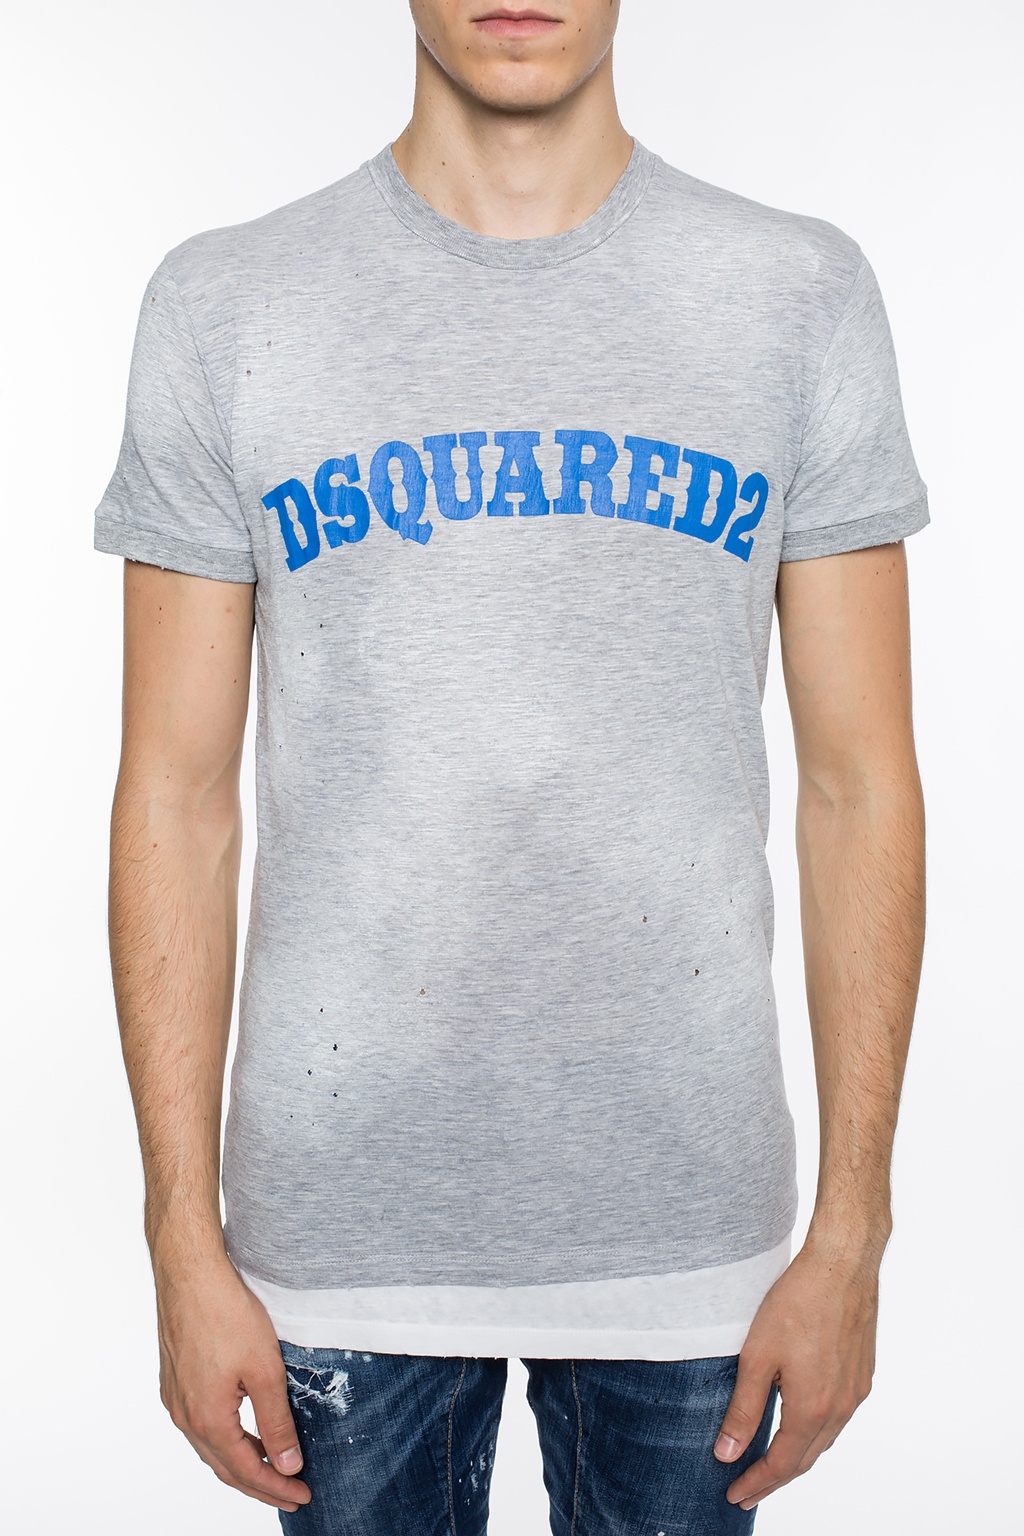 dsquared t shirt ripped